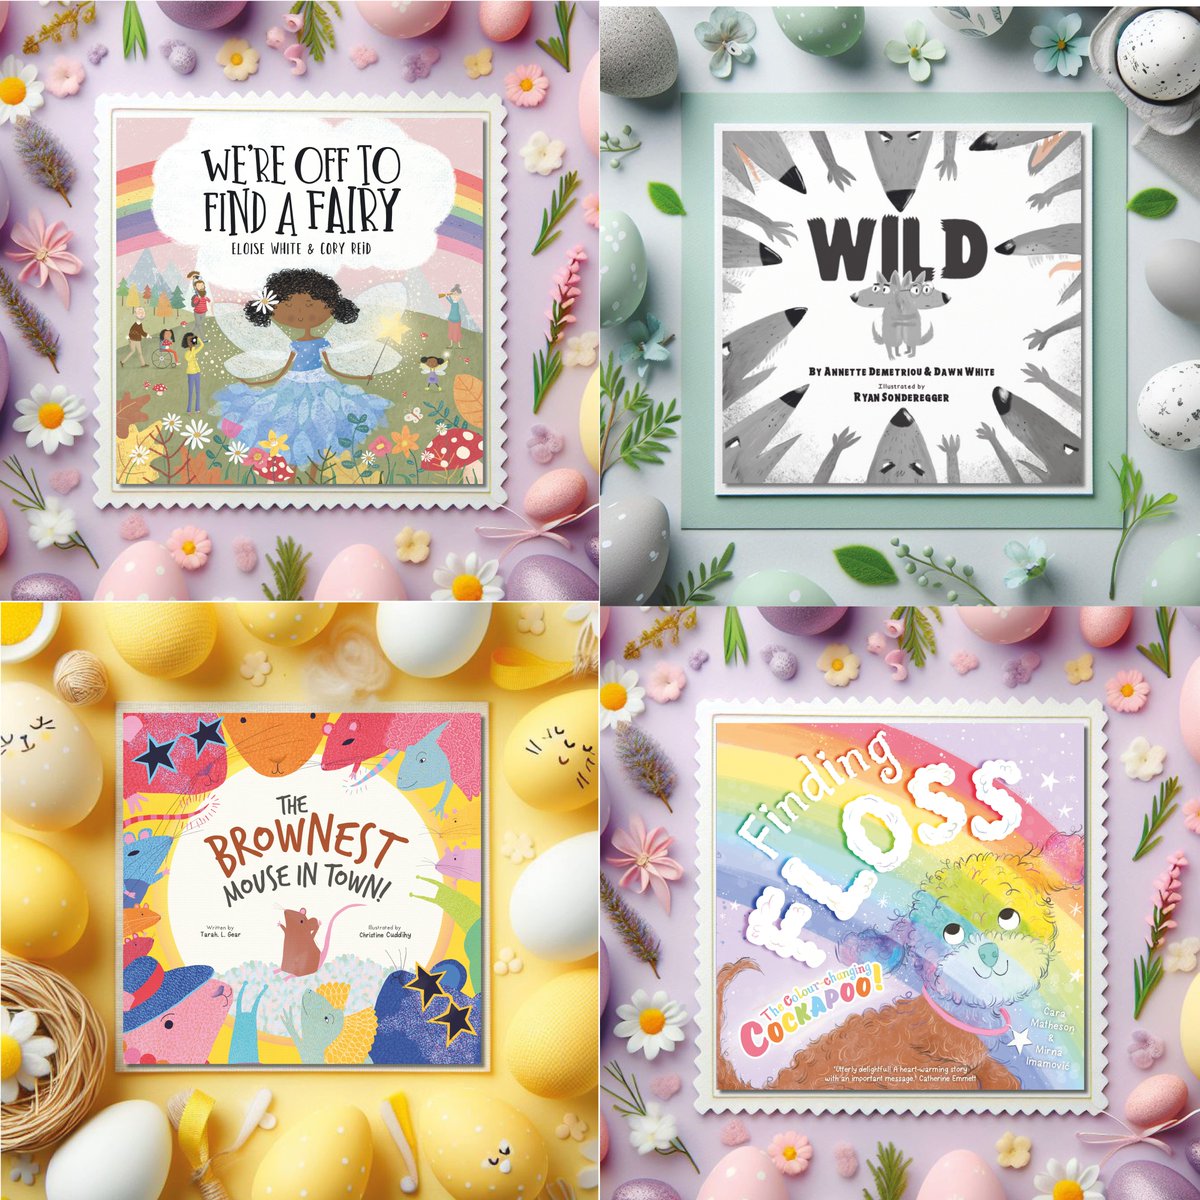 While chocolate delights the taste buds, books nourish the mind and ignite creativity. Encouraging children to read from a young age sets them on a path of lifelong learning and discovery. Get our Easter book bundle in time for the celebrations. 🥳